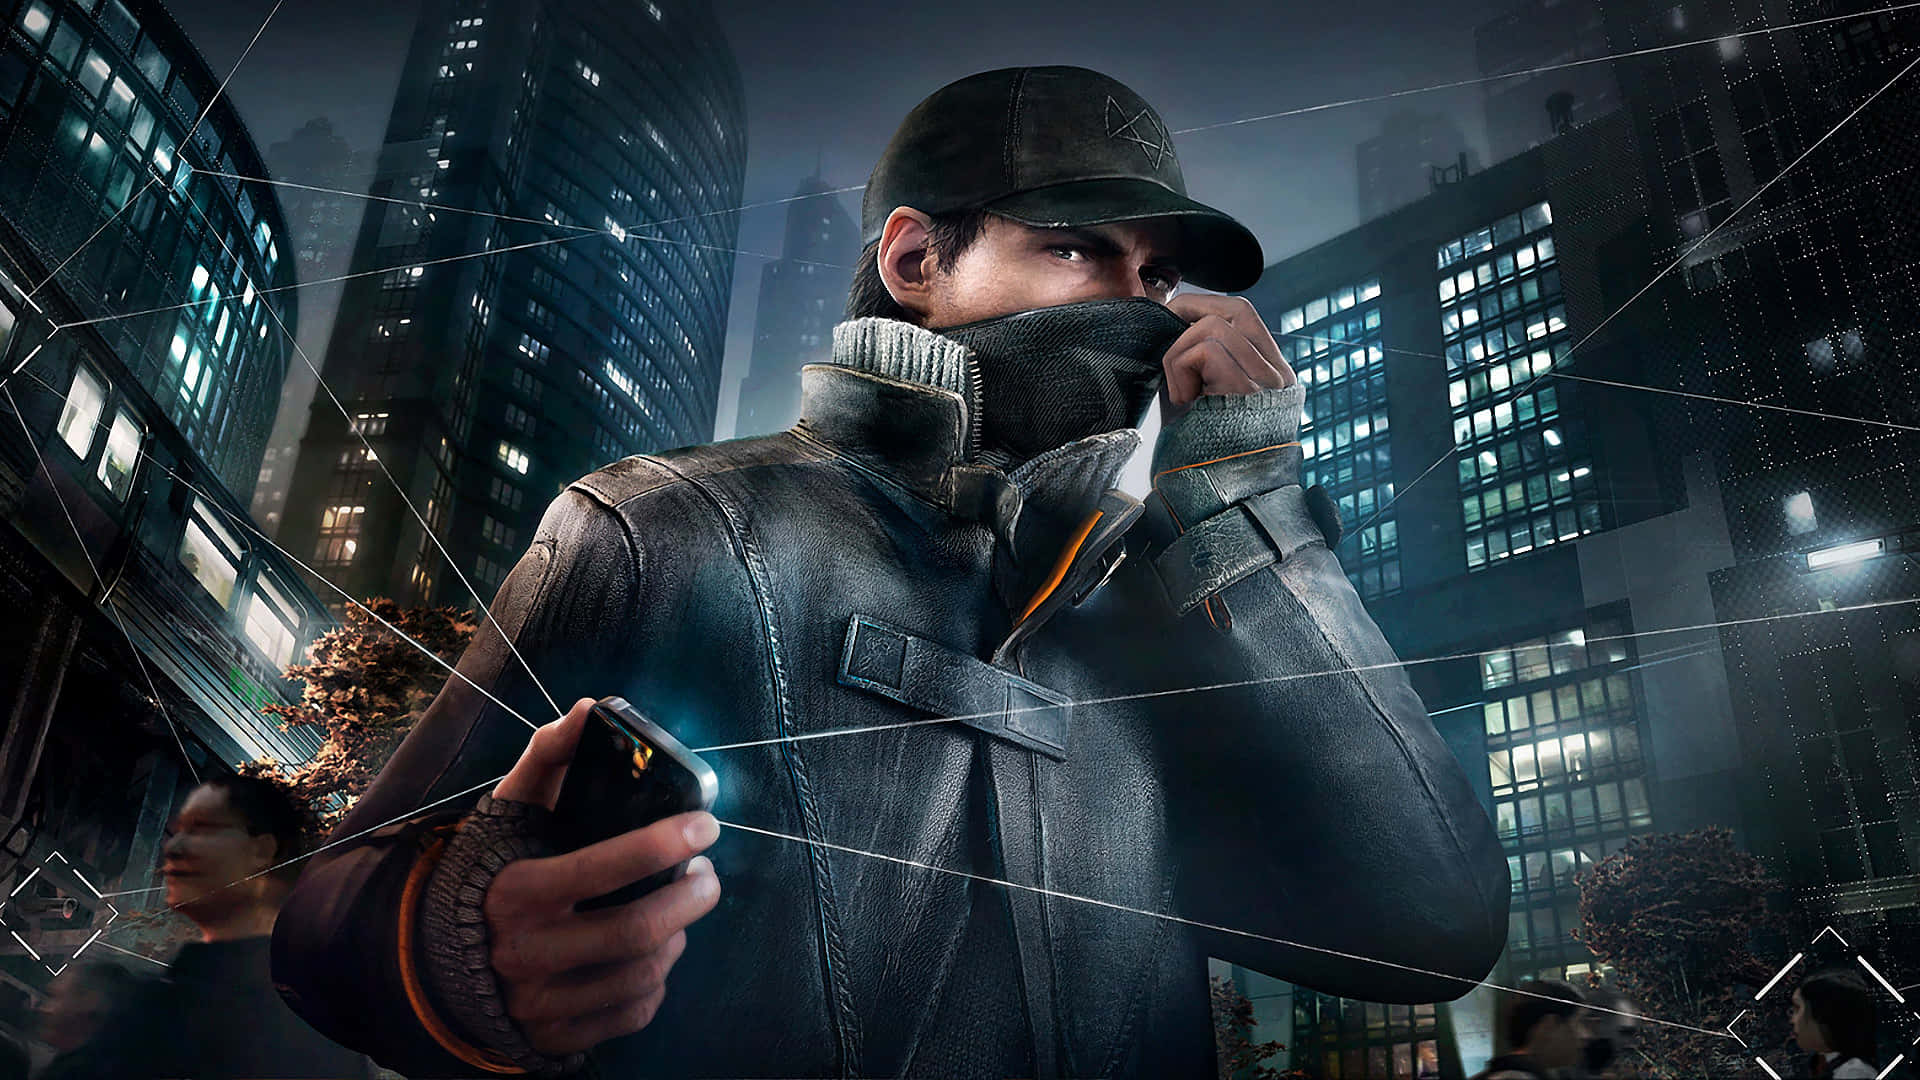 Tune into the underground of Chicago with Watch_Dogs Wallpaper